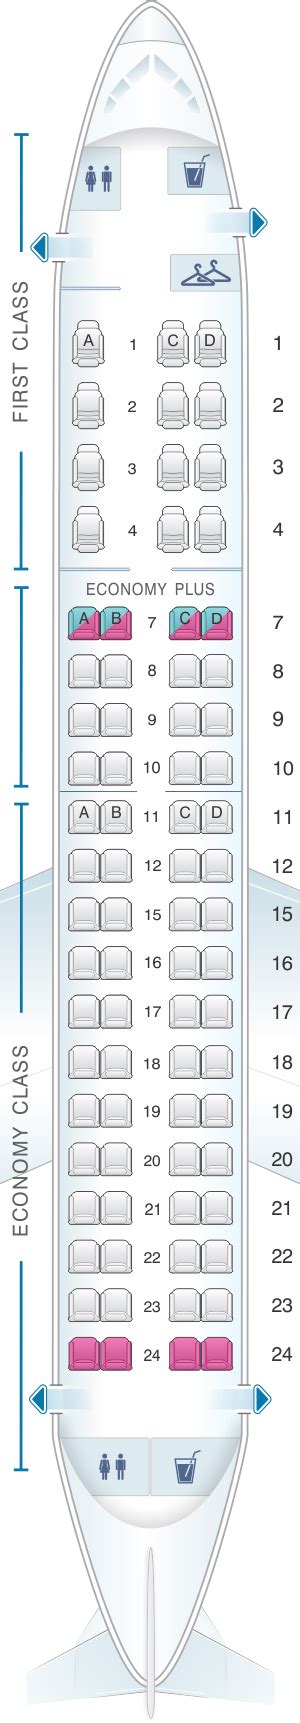 United embraer 175 seat map. The Economy class on the EMB 145 United offers a seat pitch of 31 inches and a seat width of 17.3 inches, offering people a conventional yet comfortable sitting layout. The 44 basic seats in the cabin's layout are organised in a 1-2 arrangement, making the majority of seats comfortable for travel. However, it's worth noting that there are a ... 